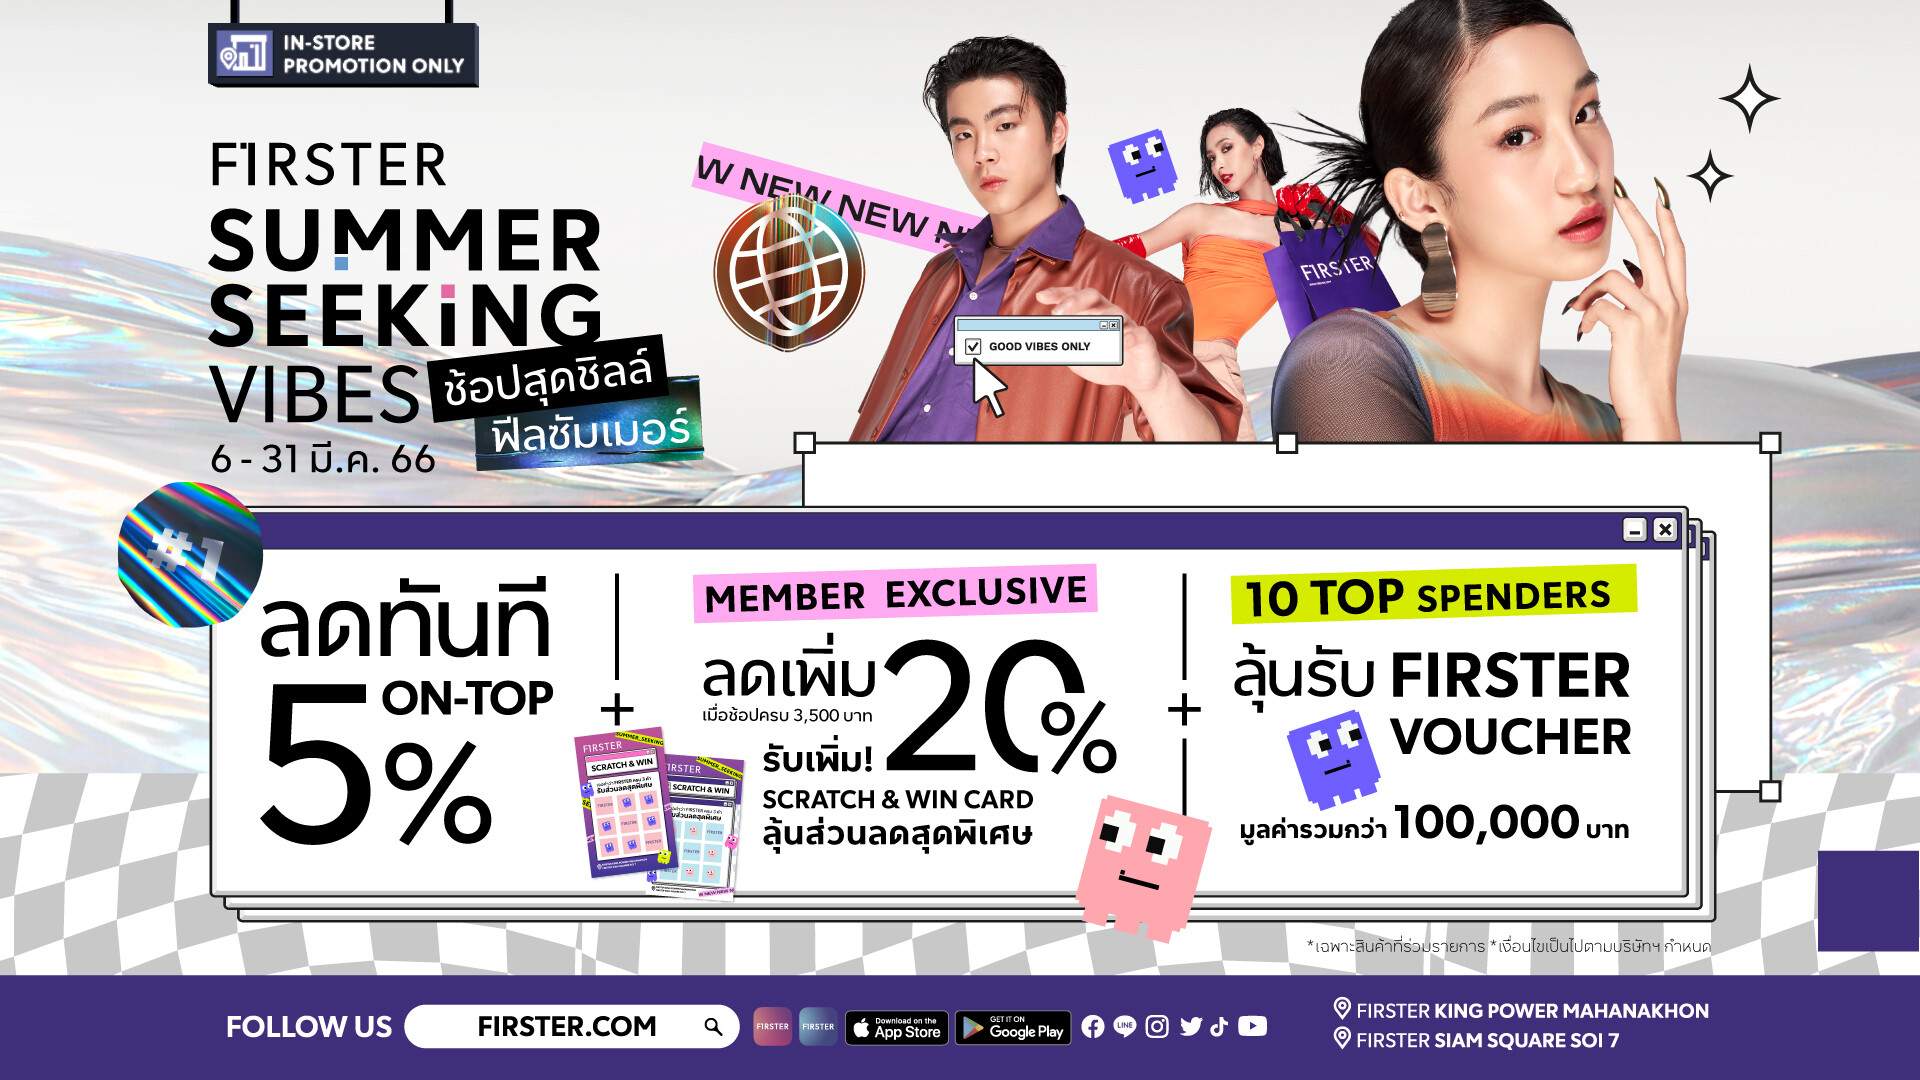 Let's Your Beauty Shine with FIRSTER Summer Seeking Vibes Shop Today for 3 Benefits! Top Spenders Get FIRSTER Vouchers Worth THB100,000